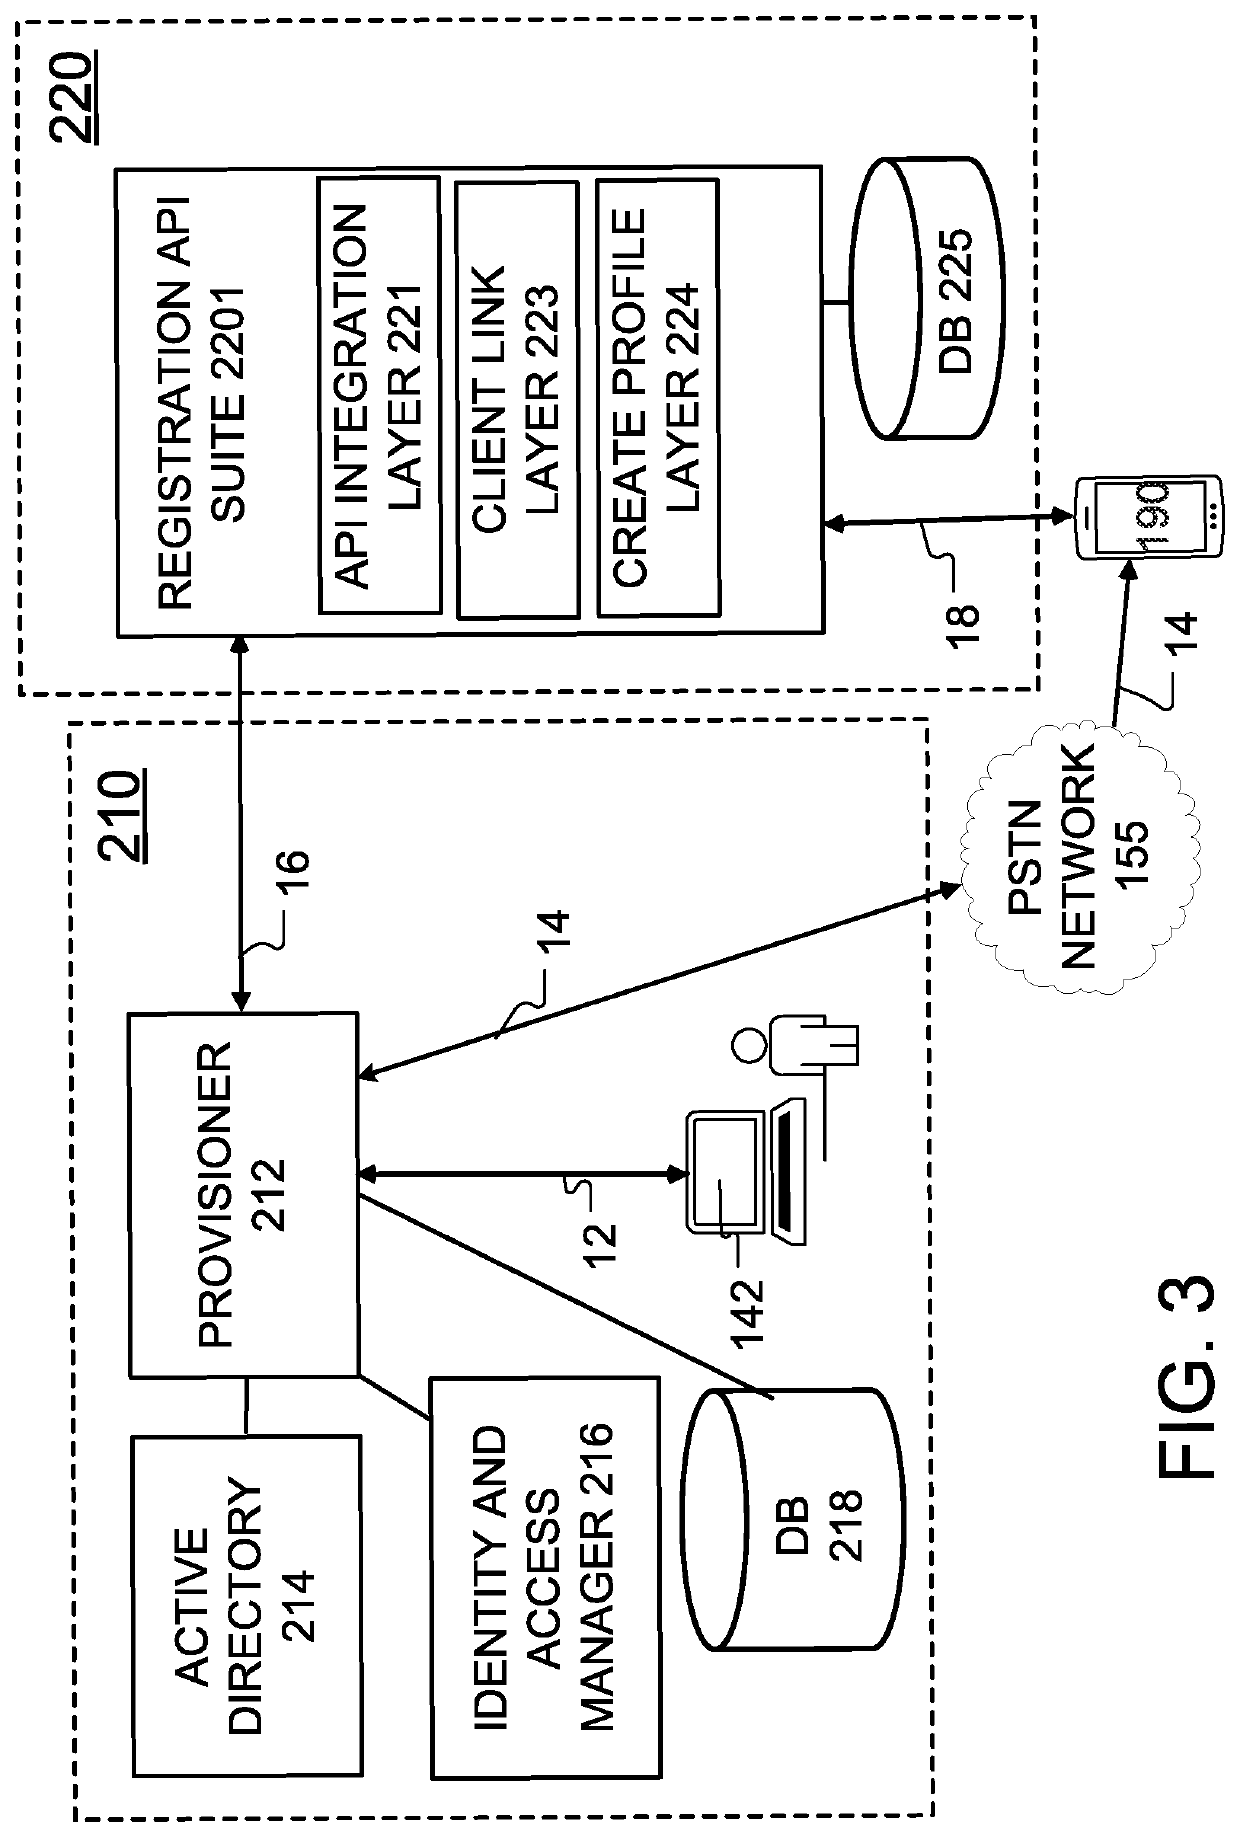 System and method for provisioning non-enterprise client devices with access credentials